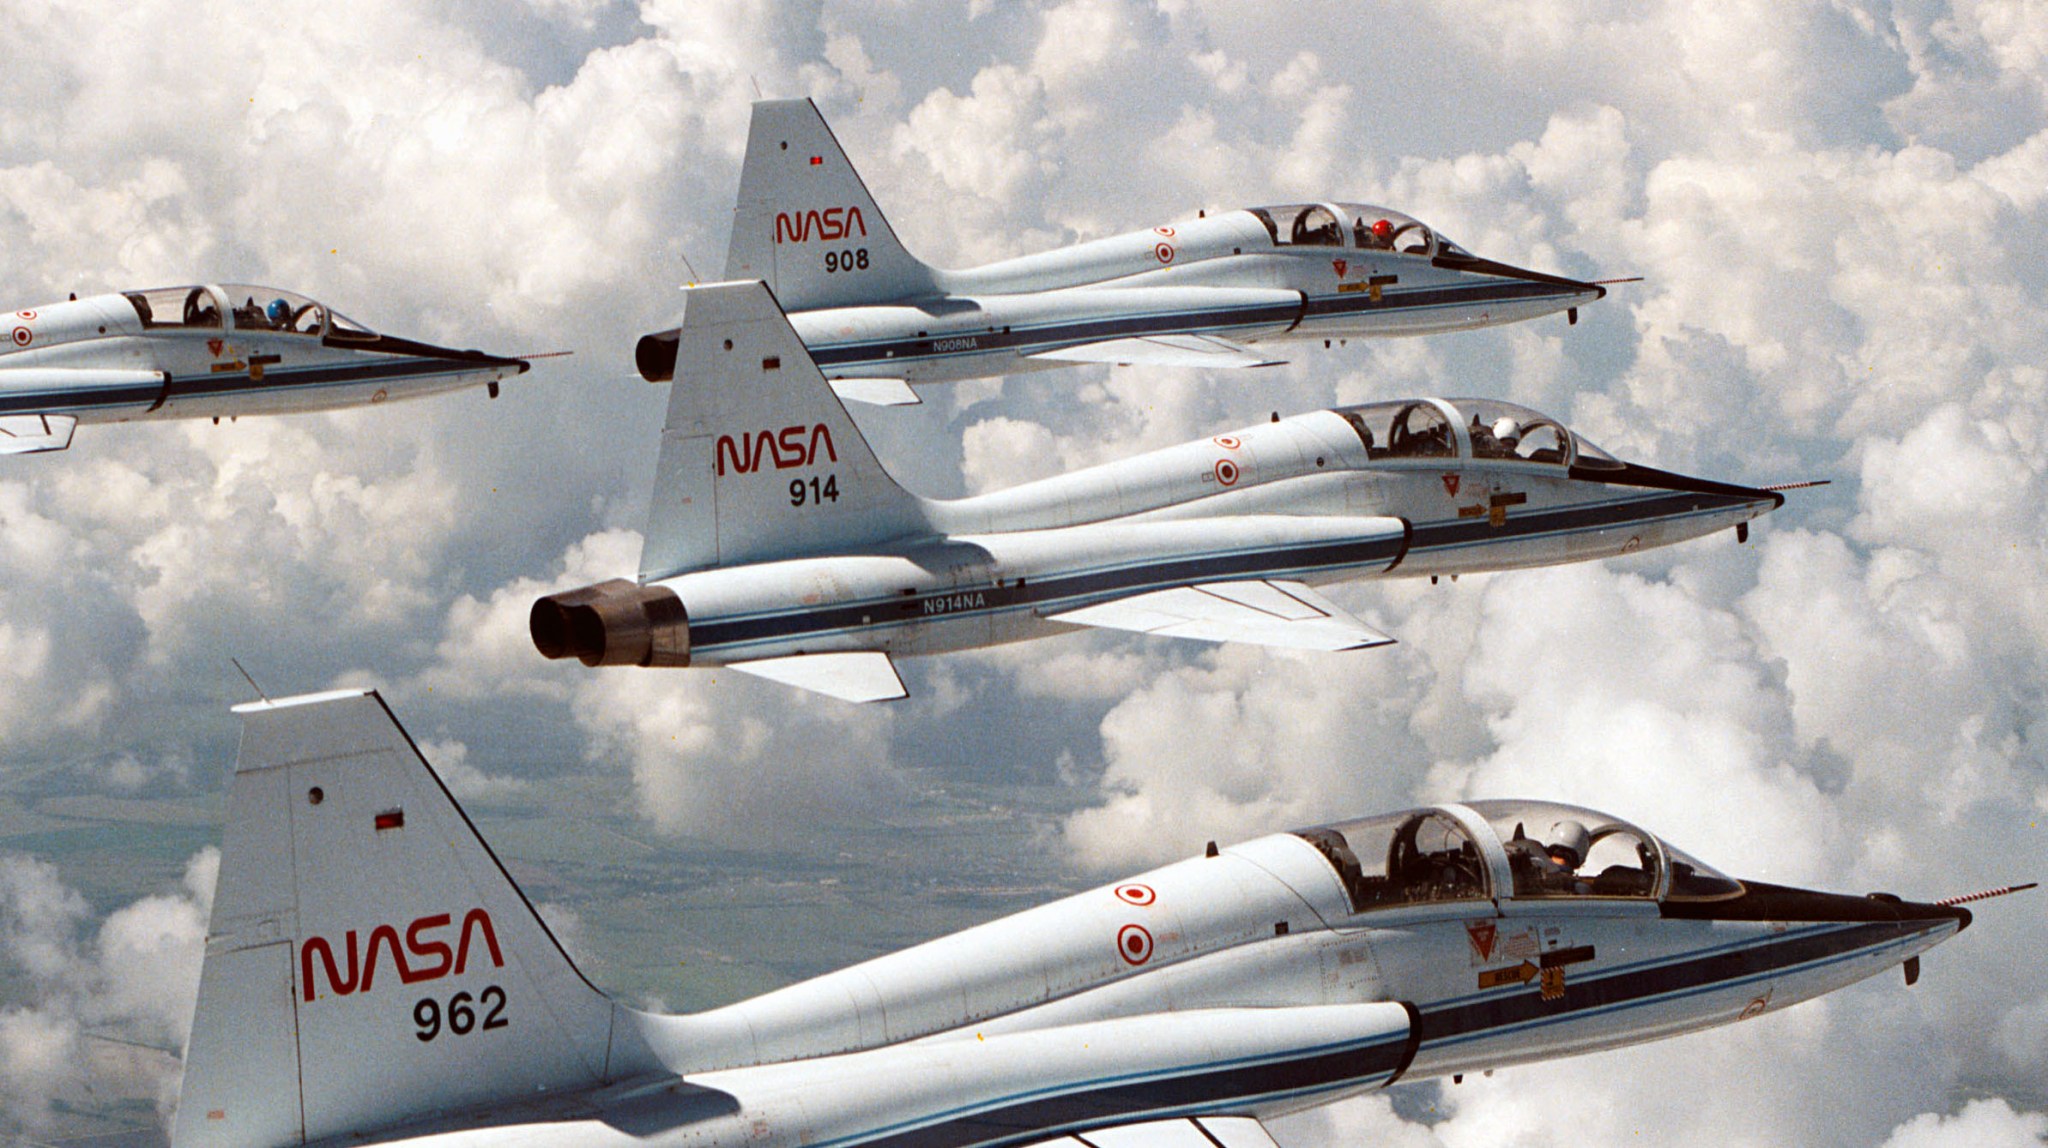 Several NASA T-38 astronaut training jets fly in formation.